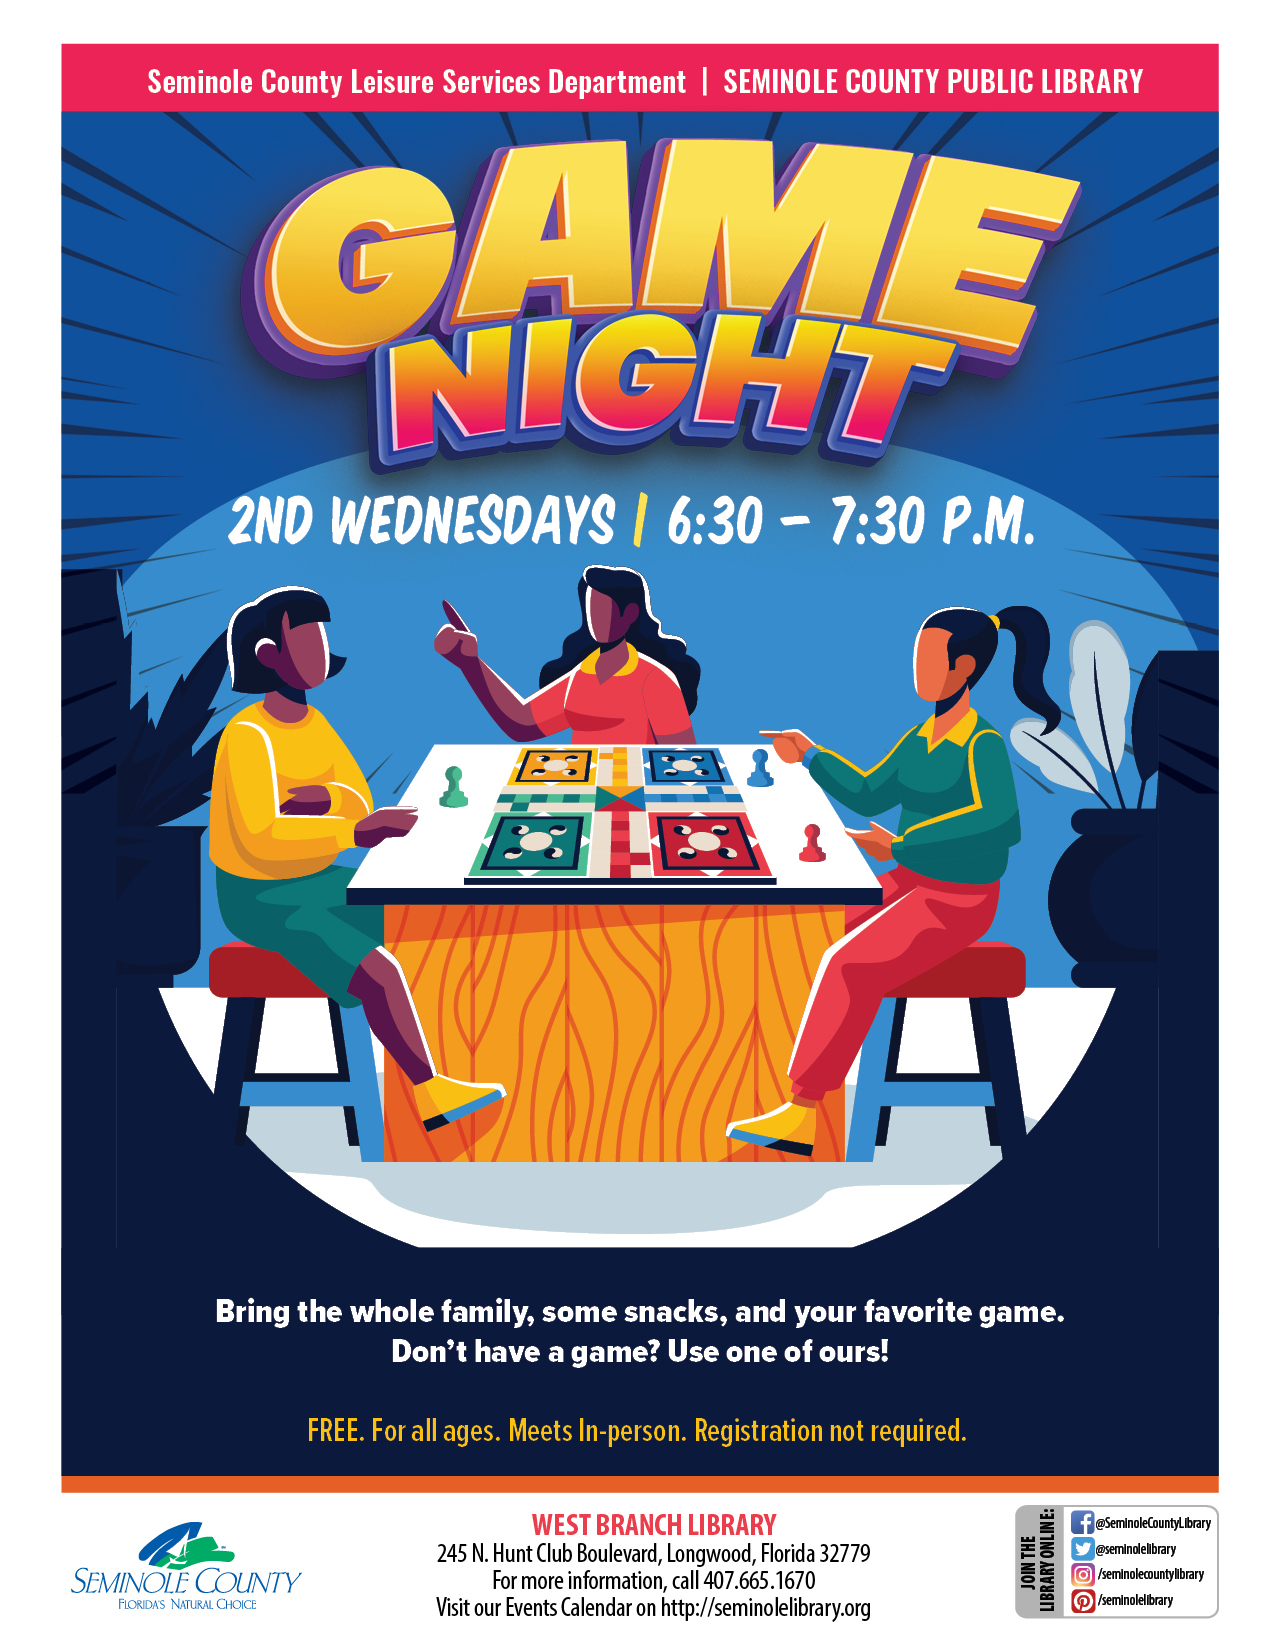 Revised Game Night Flyer